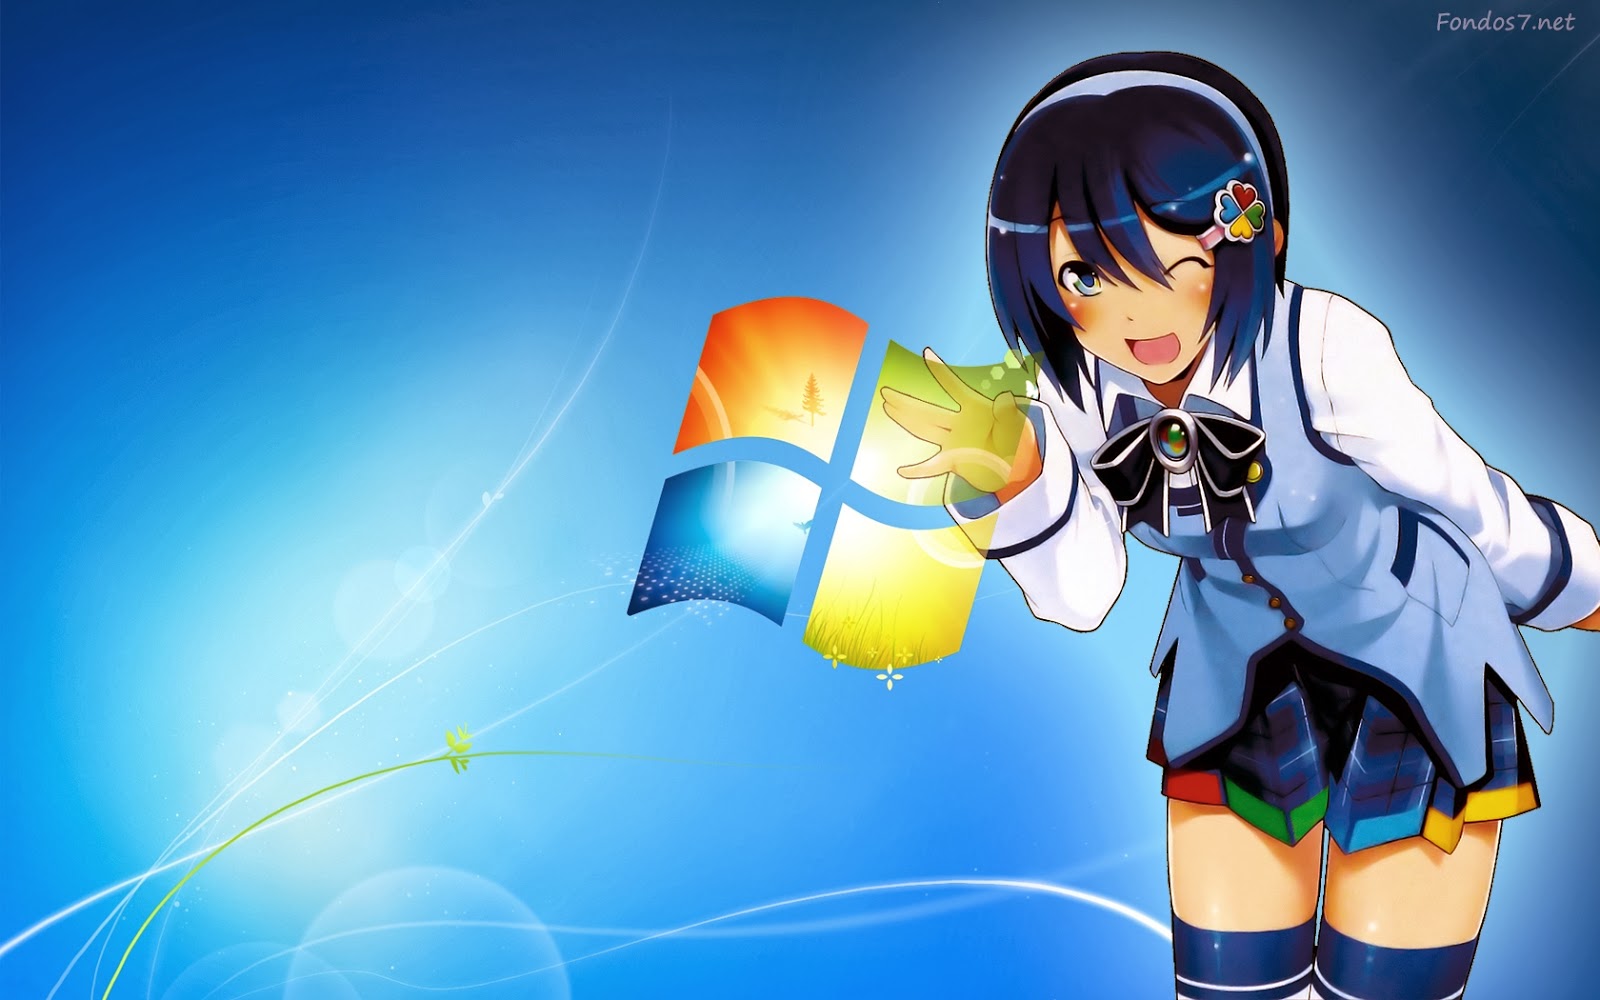 HD anime wallpapers Sure there are a lot of anime wallpaper websites